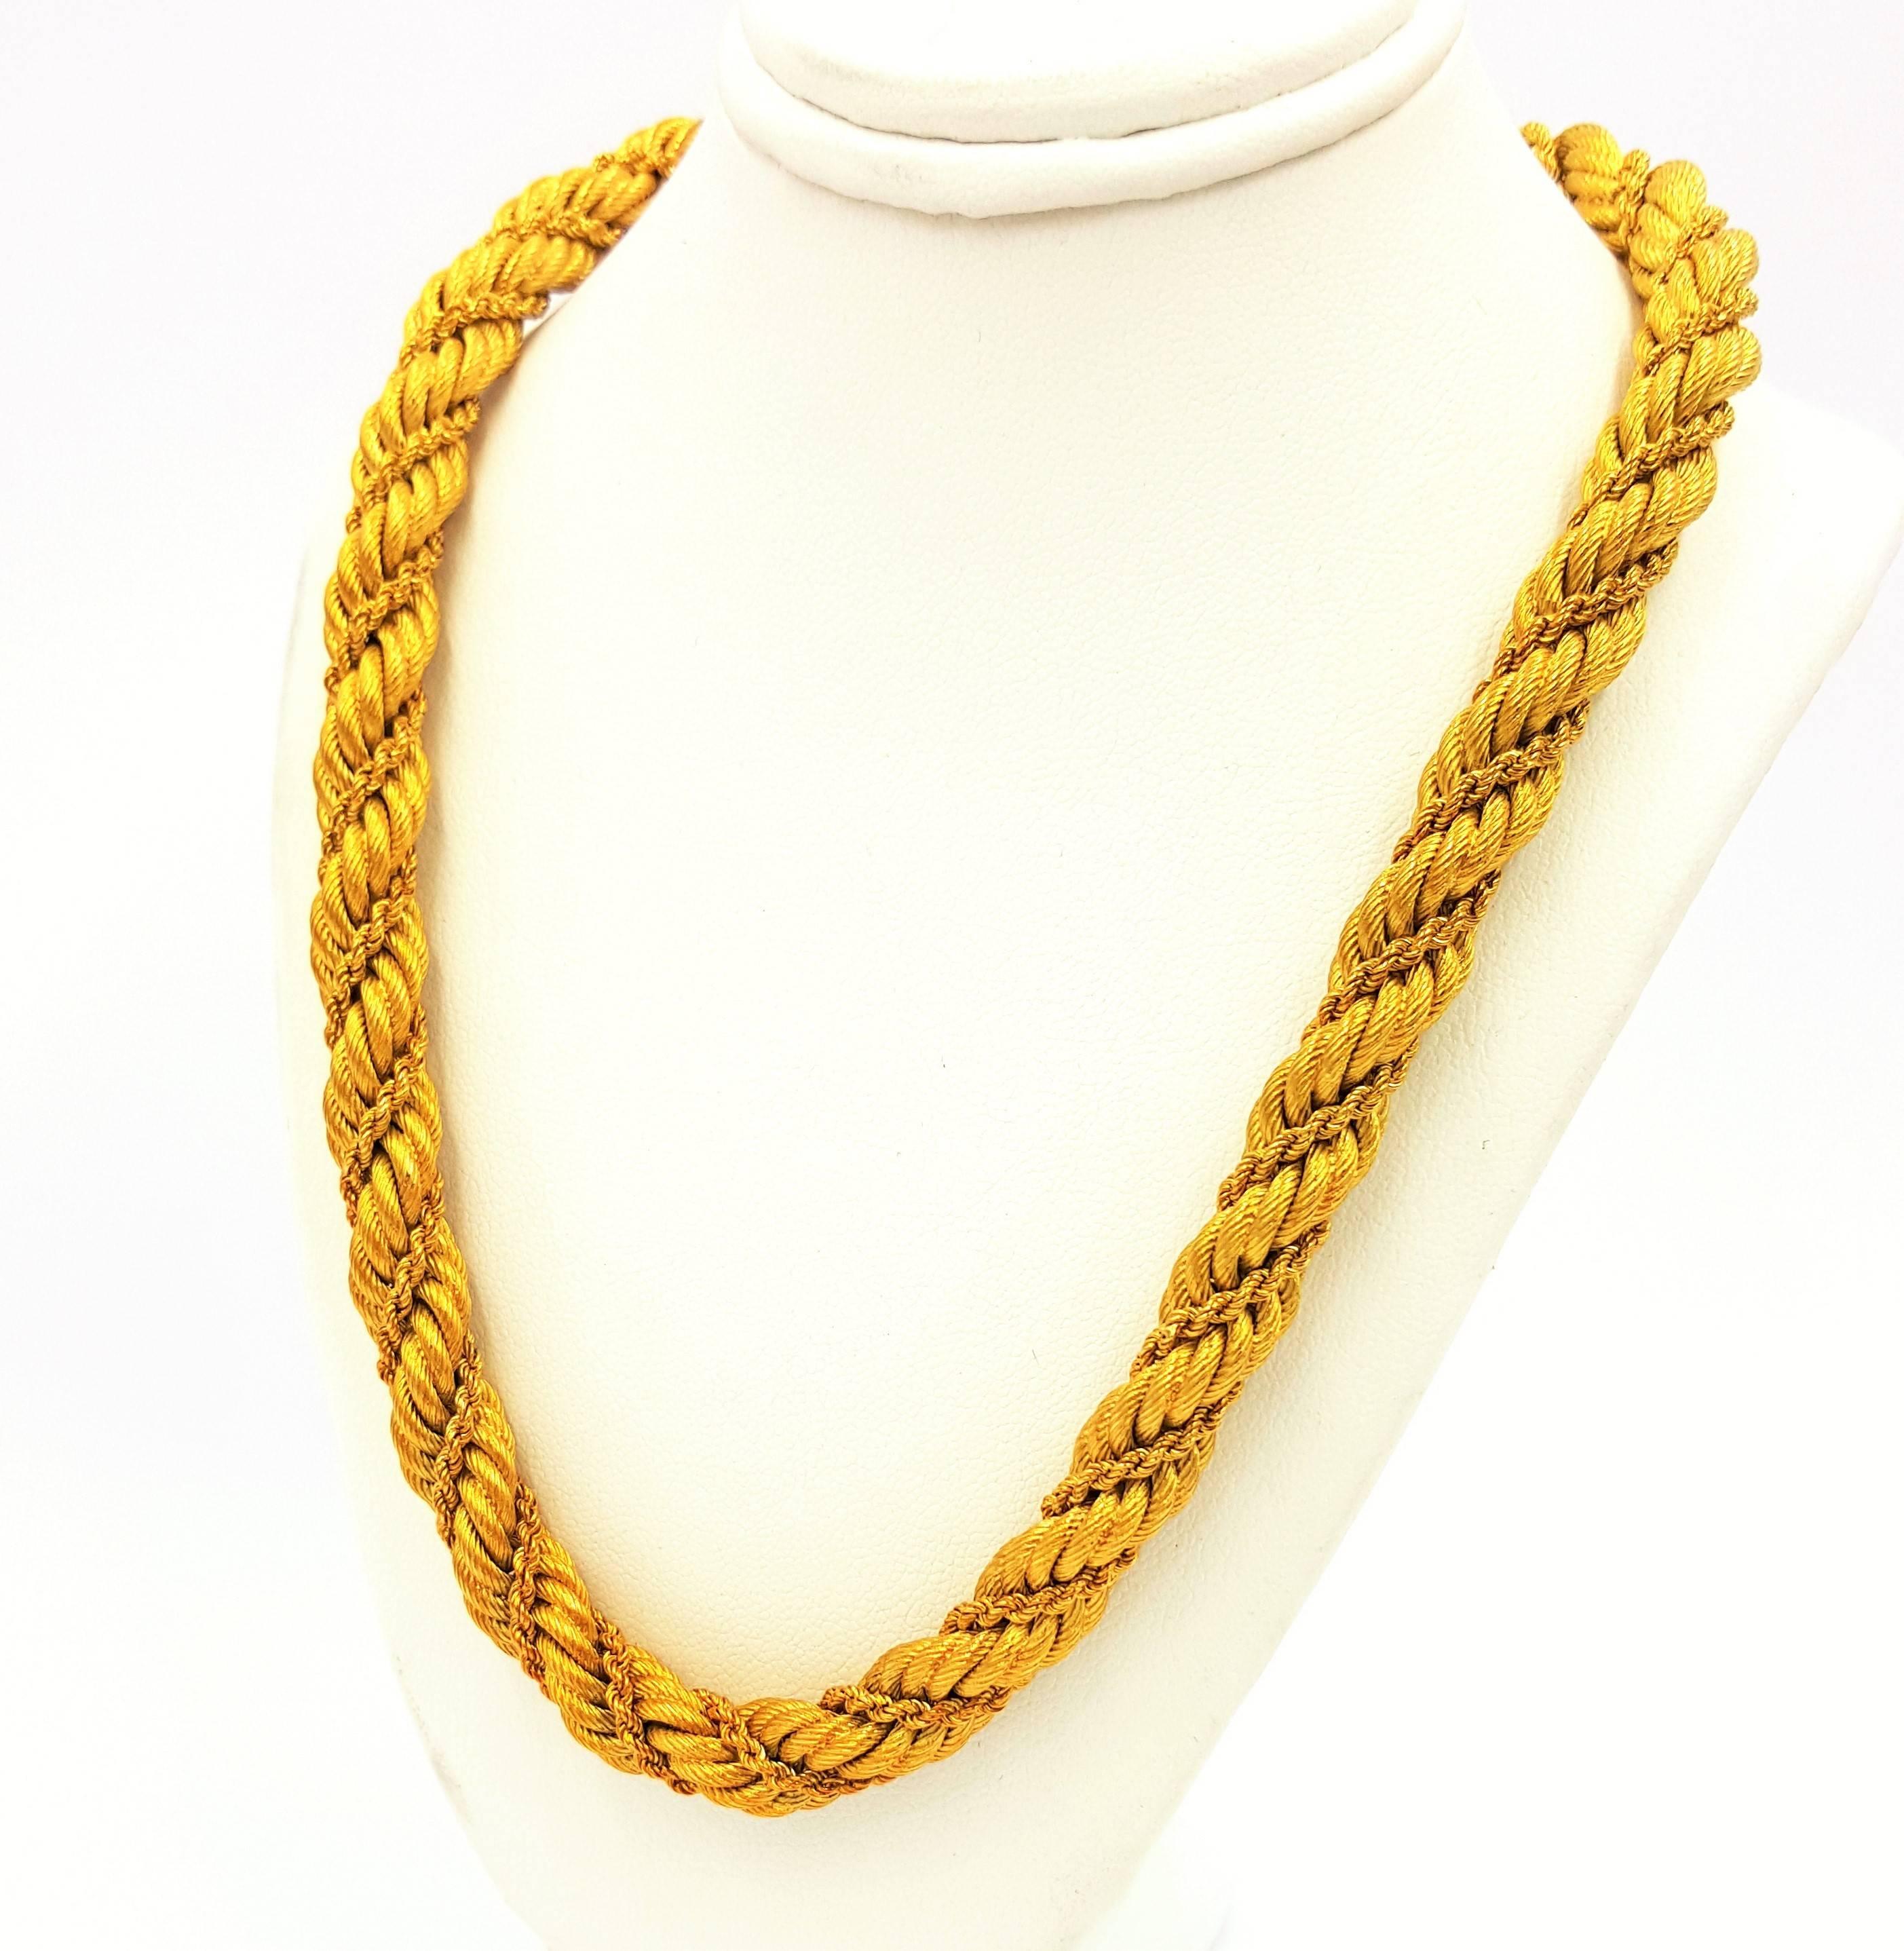 Vintage Tiffany & Co. Golden Light Collection 18K Twisted Gold Rope Necklace For Sale 1